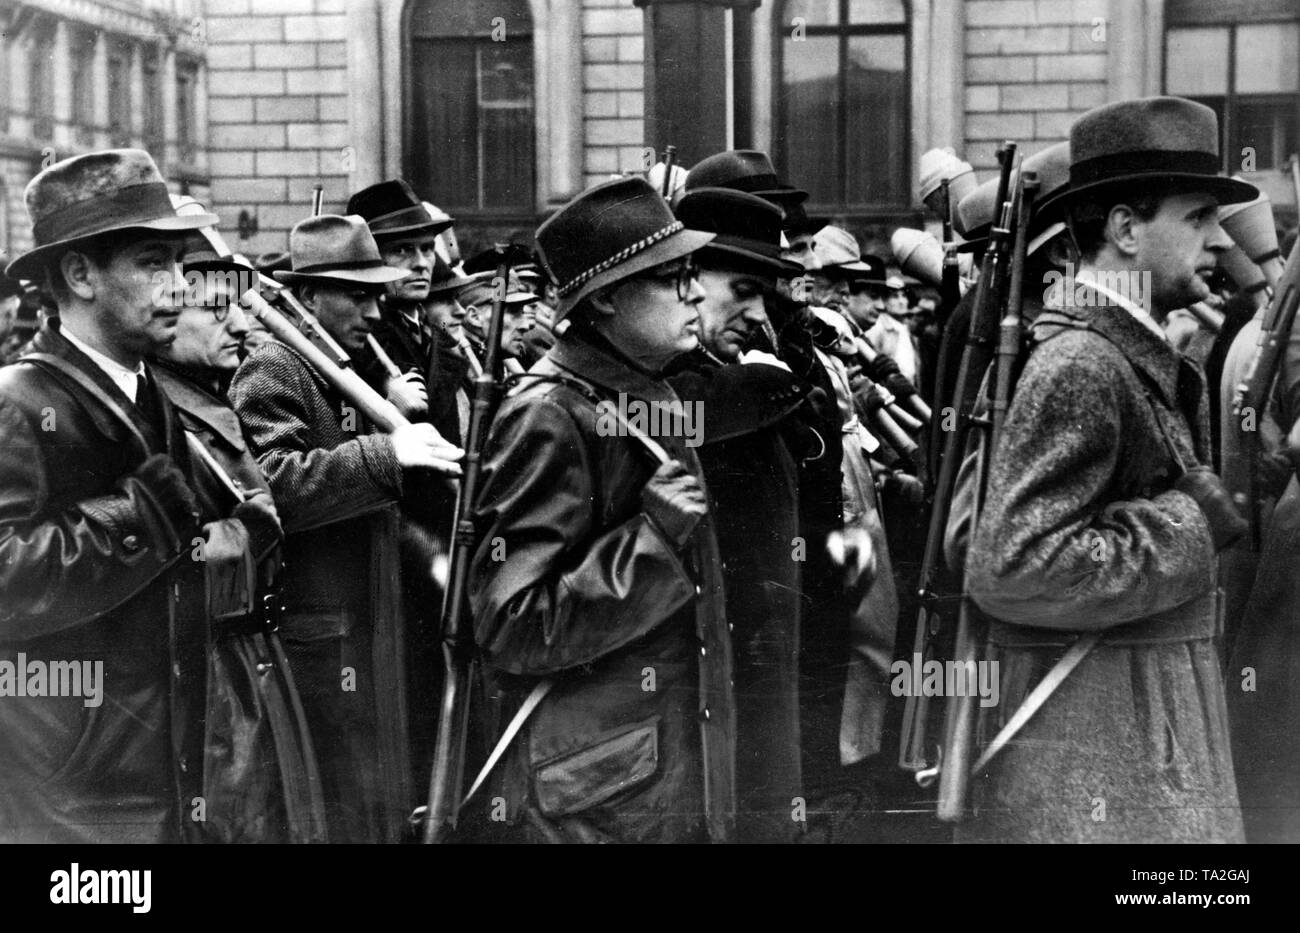 Members of the German Volkssturm march through a German city. The men in the foreground carry Schmeisser MP-41 with wooden shaft, the man on the far right a Gebirgsjaegerkarabiner g33-40. The other members are armed with anti-tank rocket launchers. Stock Photo